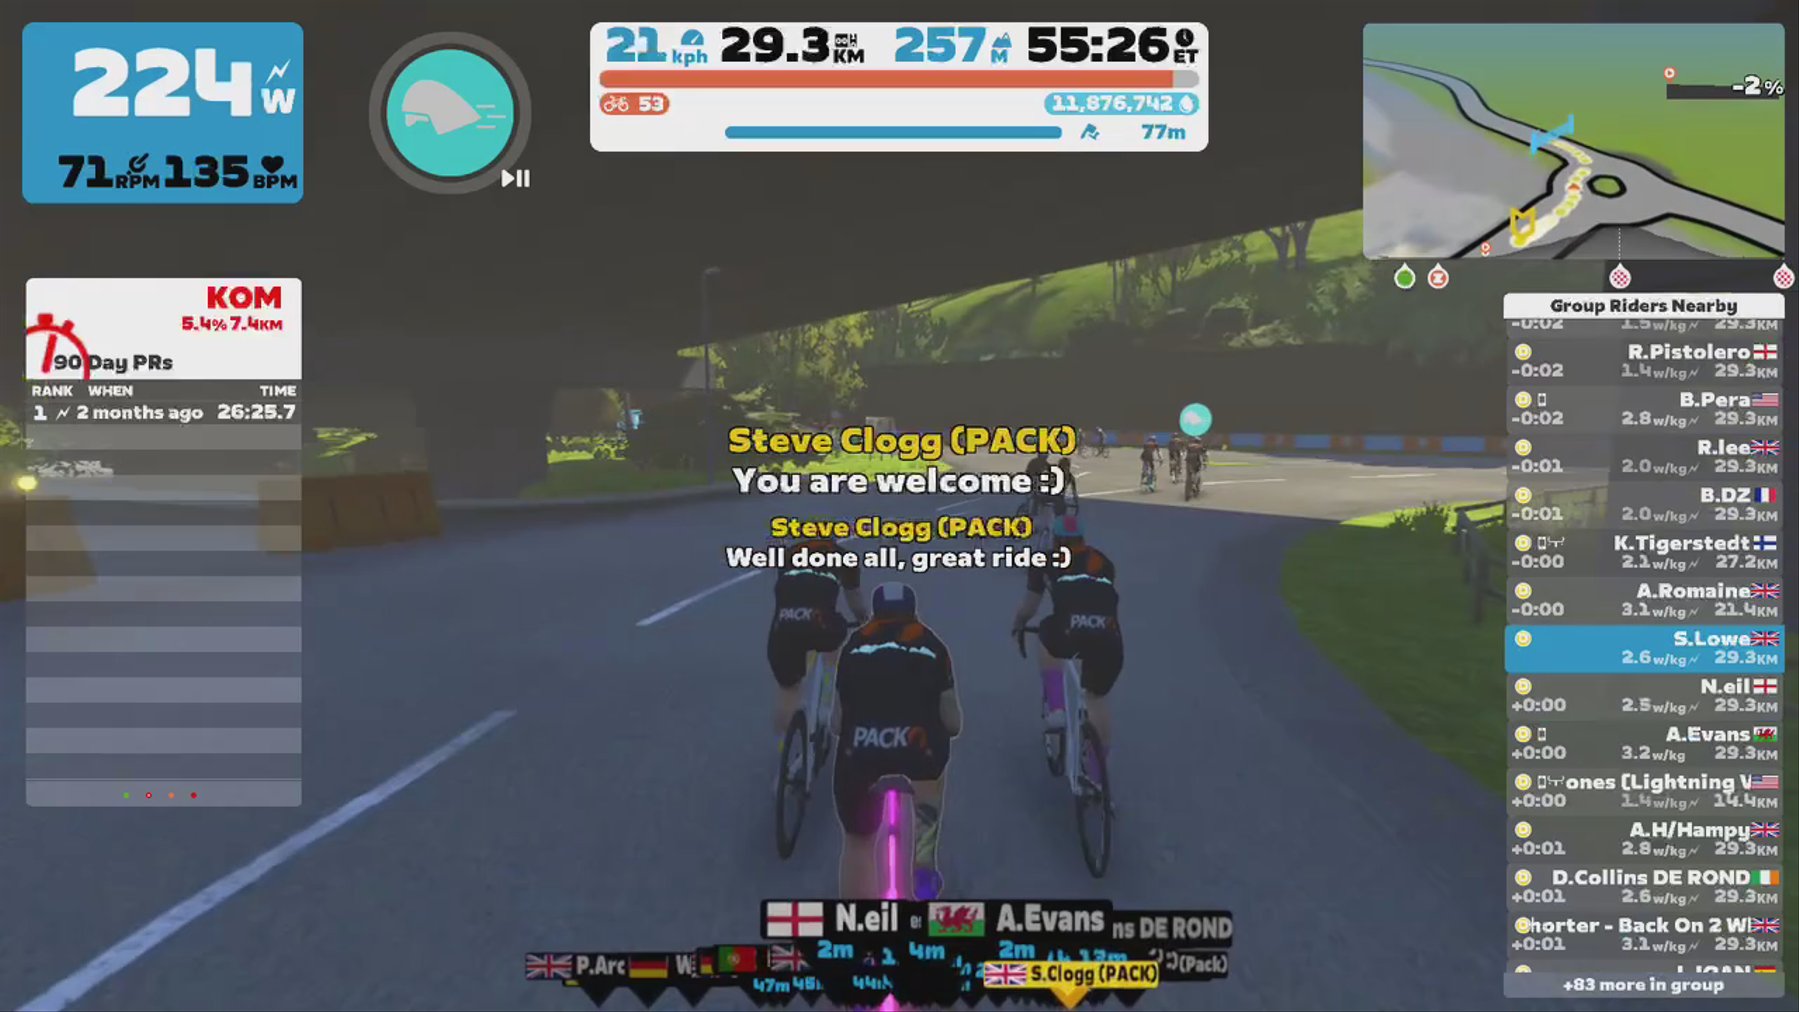 Zwift - Group Ride: PACK Social + KOM After Party  (D) on Innsbruck KOM After Party in Innsbruck